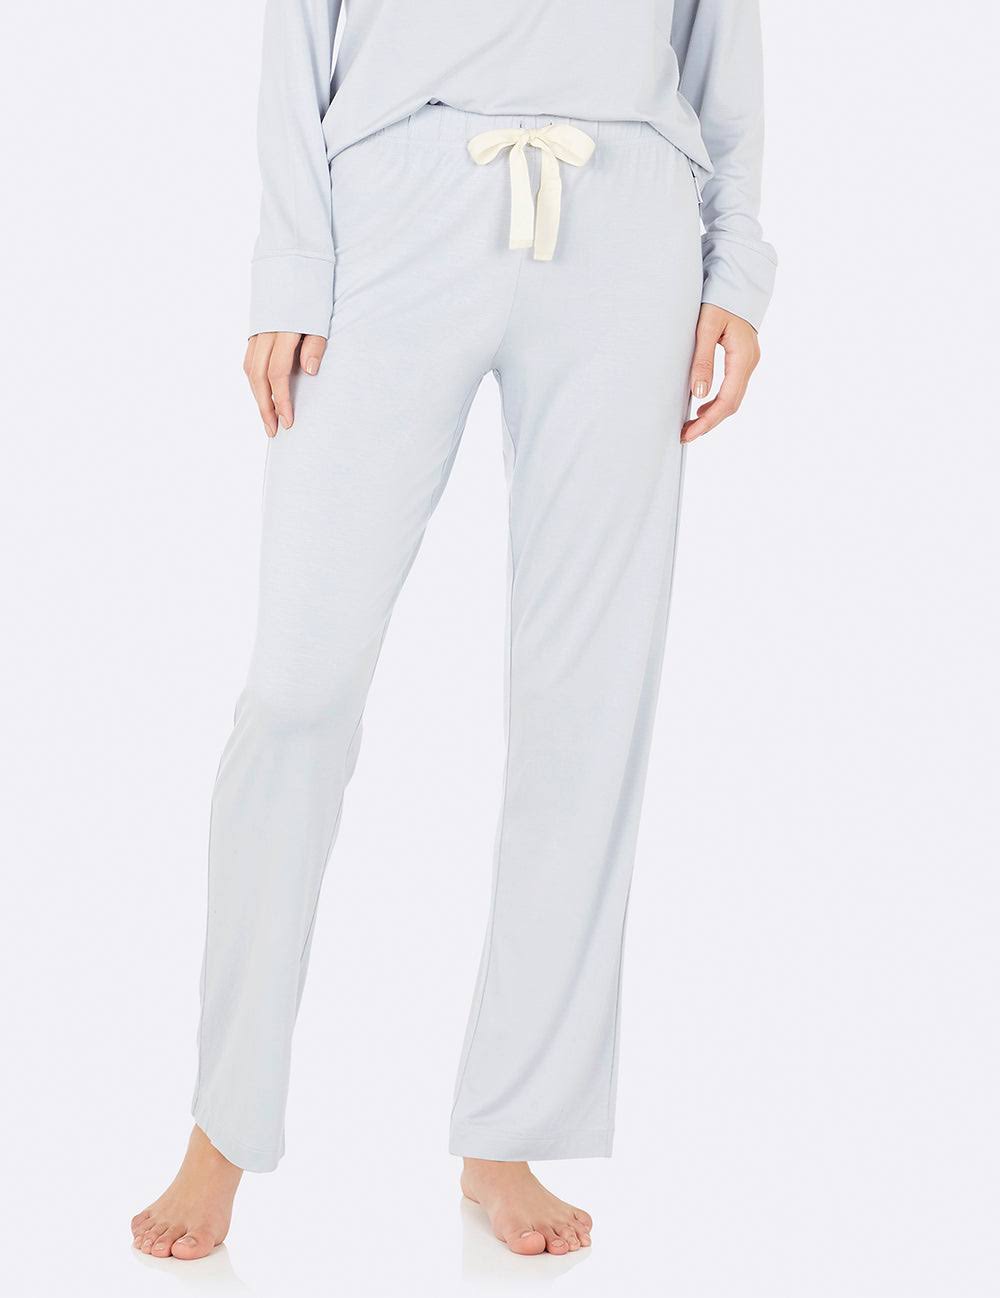 Boody | Goodnight Sleep Pant in Dove | Size M